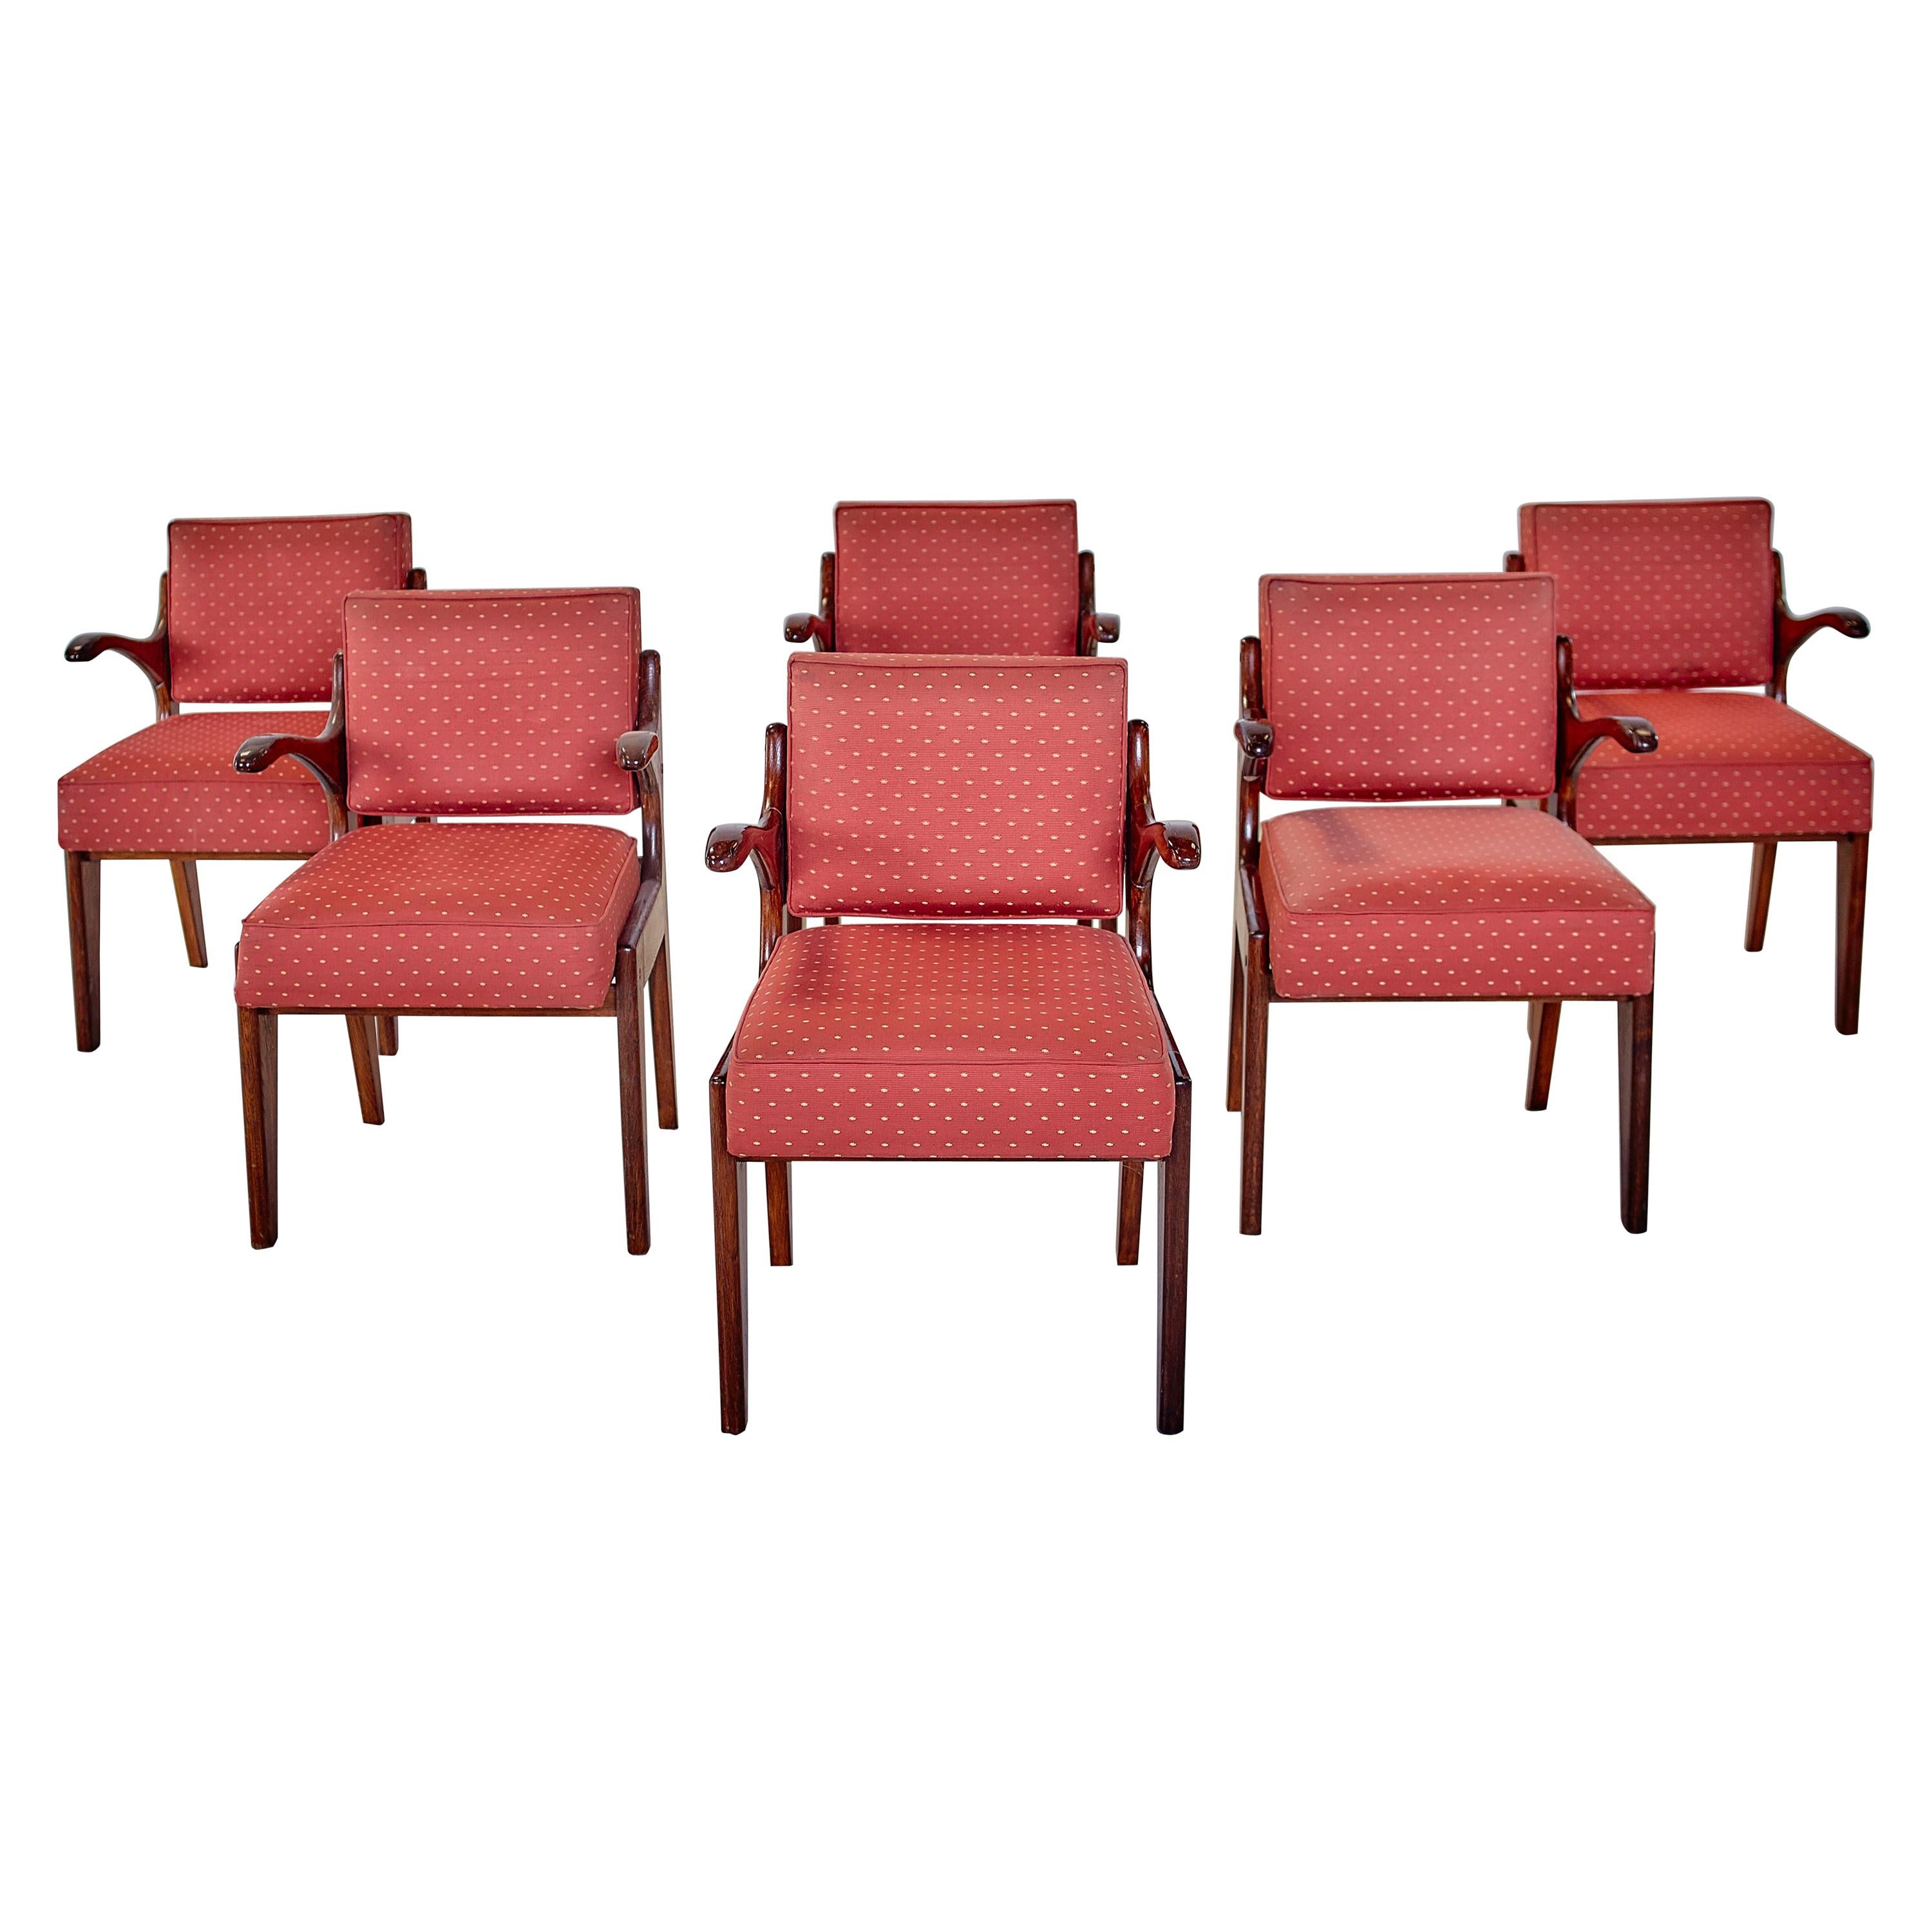 Guillerme & Chambron Midcentury Red Varnished Oak and Fabric French Chairs, 1960 For Sale